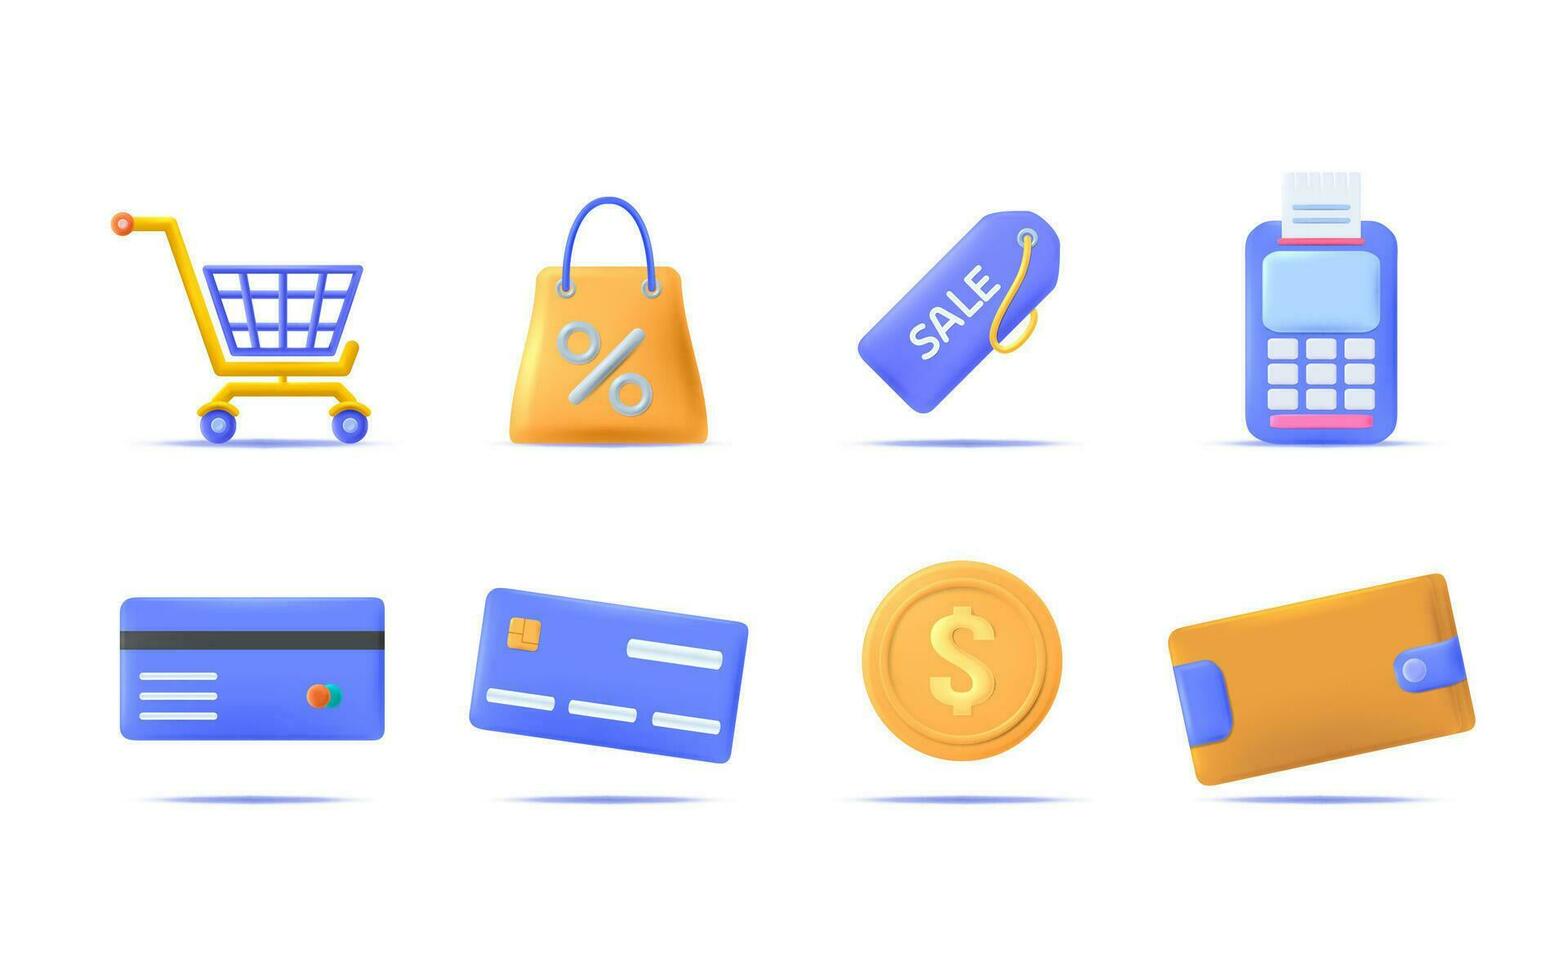 3d online shopping icon set. Shopping cart, bag, tag, payment, credit card, wallet and money icons. vector